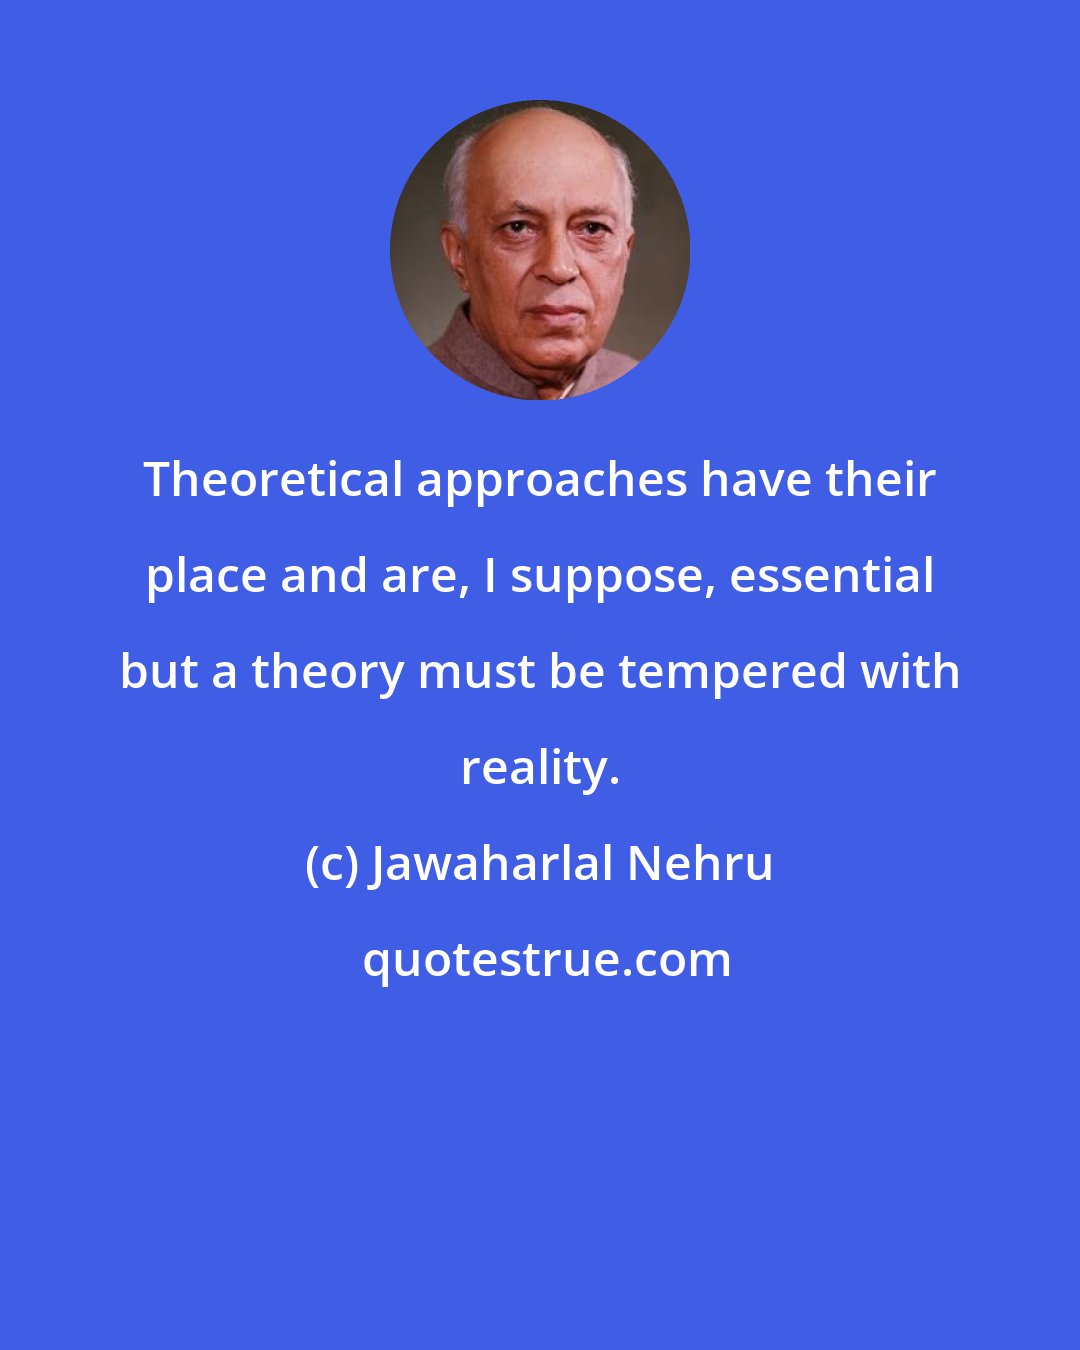 Jawaharlal Nehru: Theoretical approaches have their place and are, I suppose, essential but a theory must be tempered with reality.